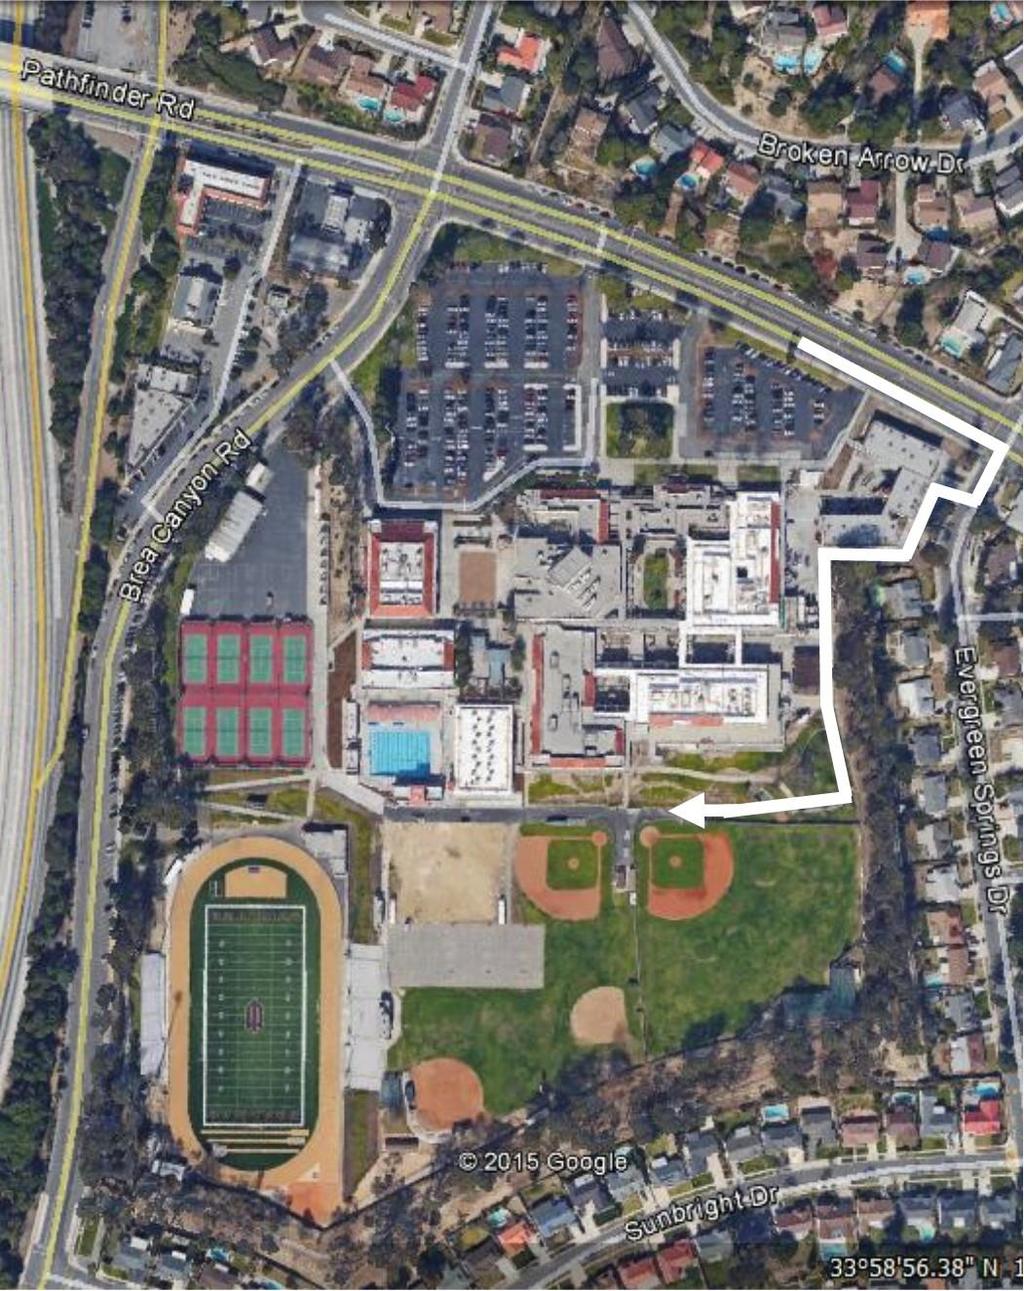 Venue Directions: The Varsity Baseball Field, JV Baseball & Softball Fields are located on the South side of campus. EMS will enter from Evergreen Springs Dr.